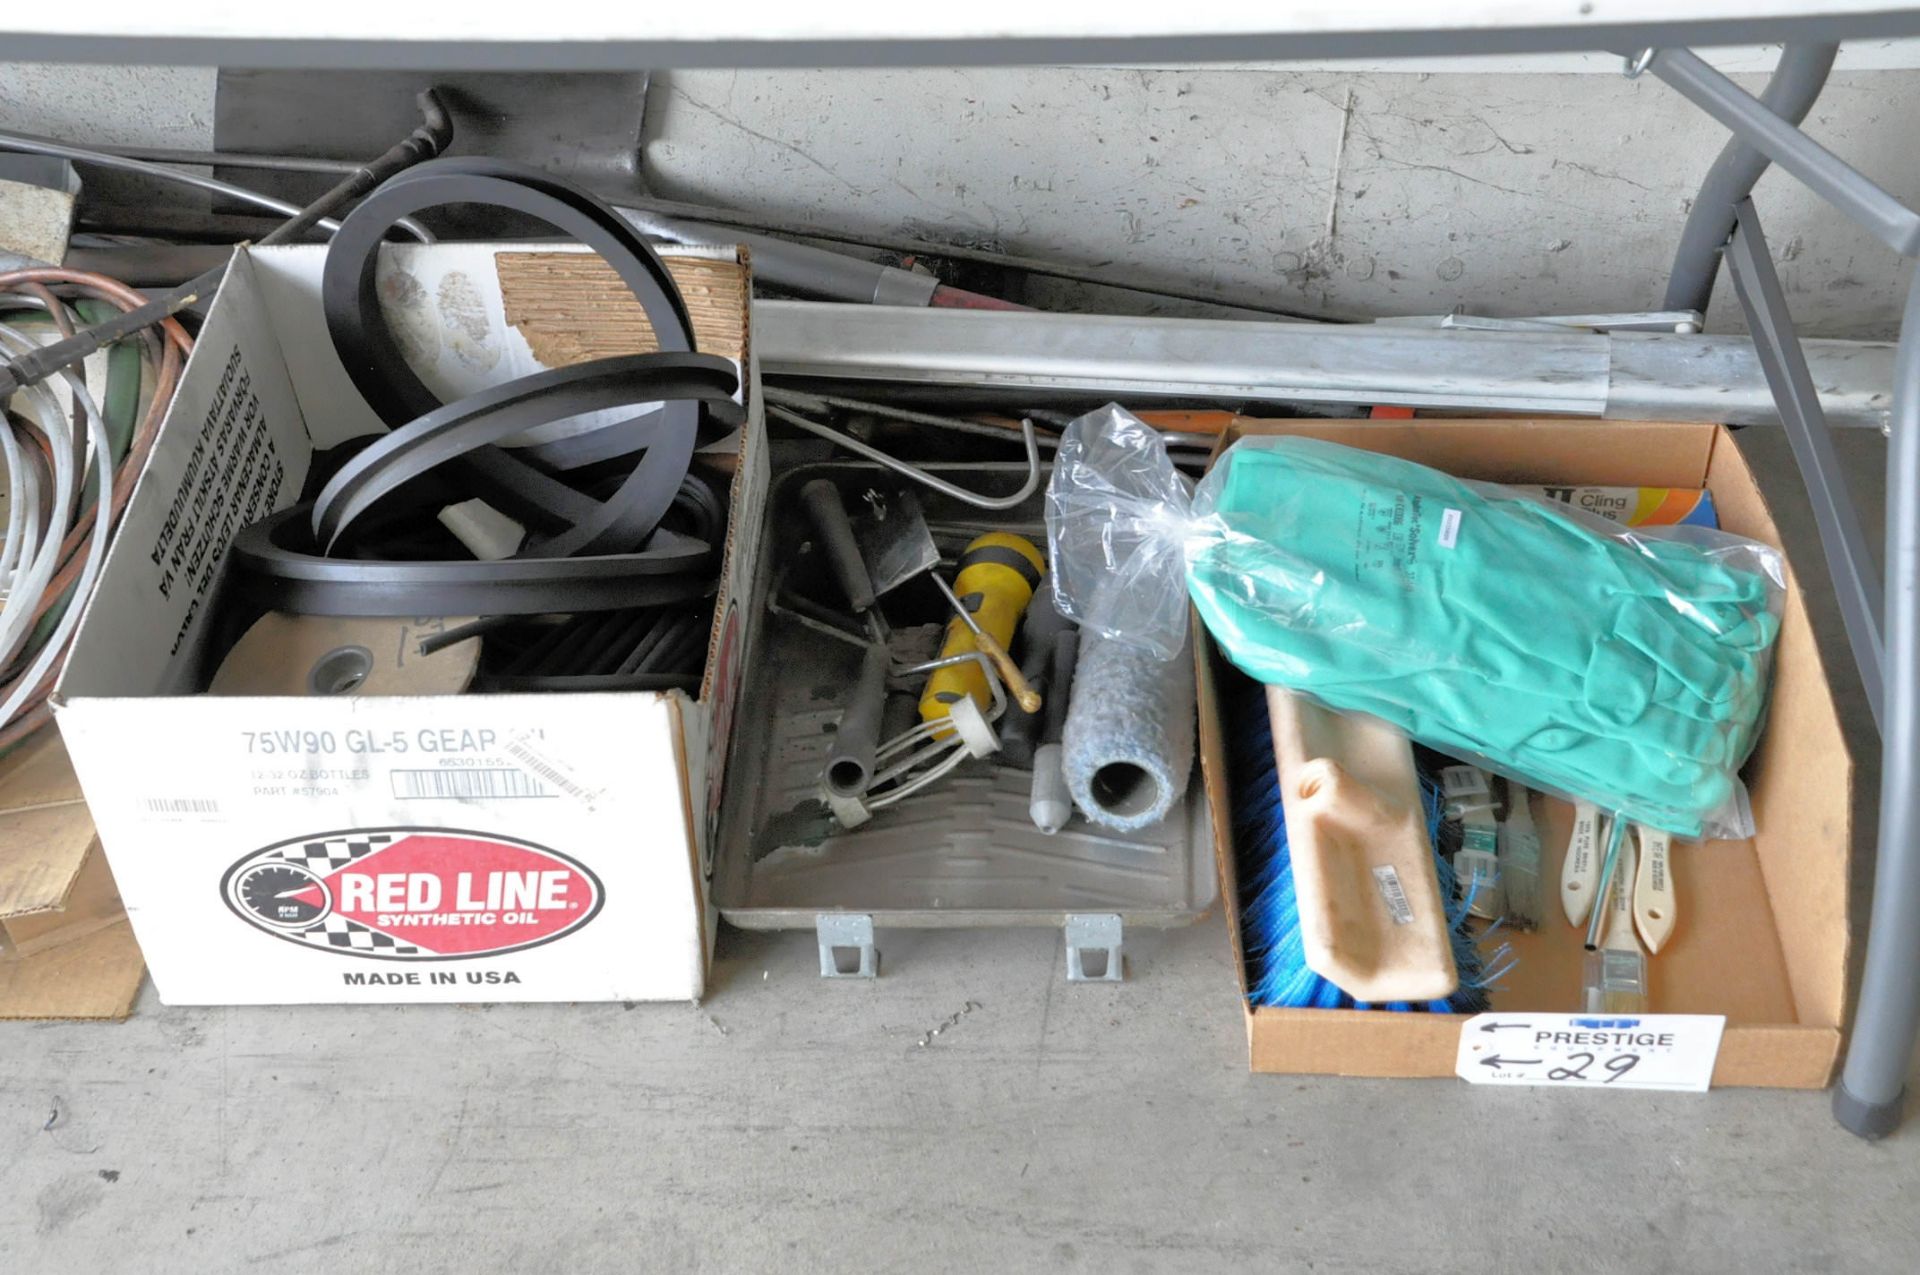 Lot-Various Tool Boxes, Tubing, Paint Rollers, Brushes, etc. Under (1) Table, (Bldg 1) - Image 3 of 3